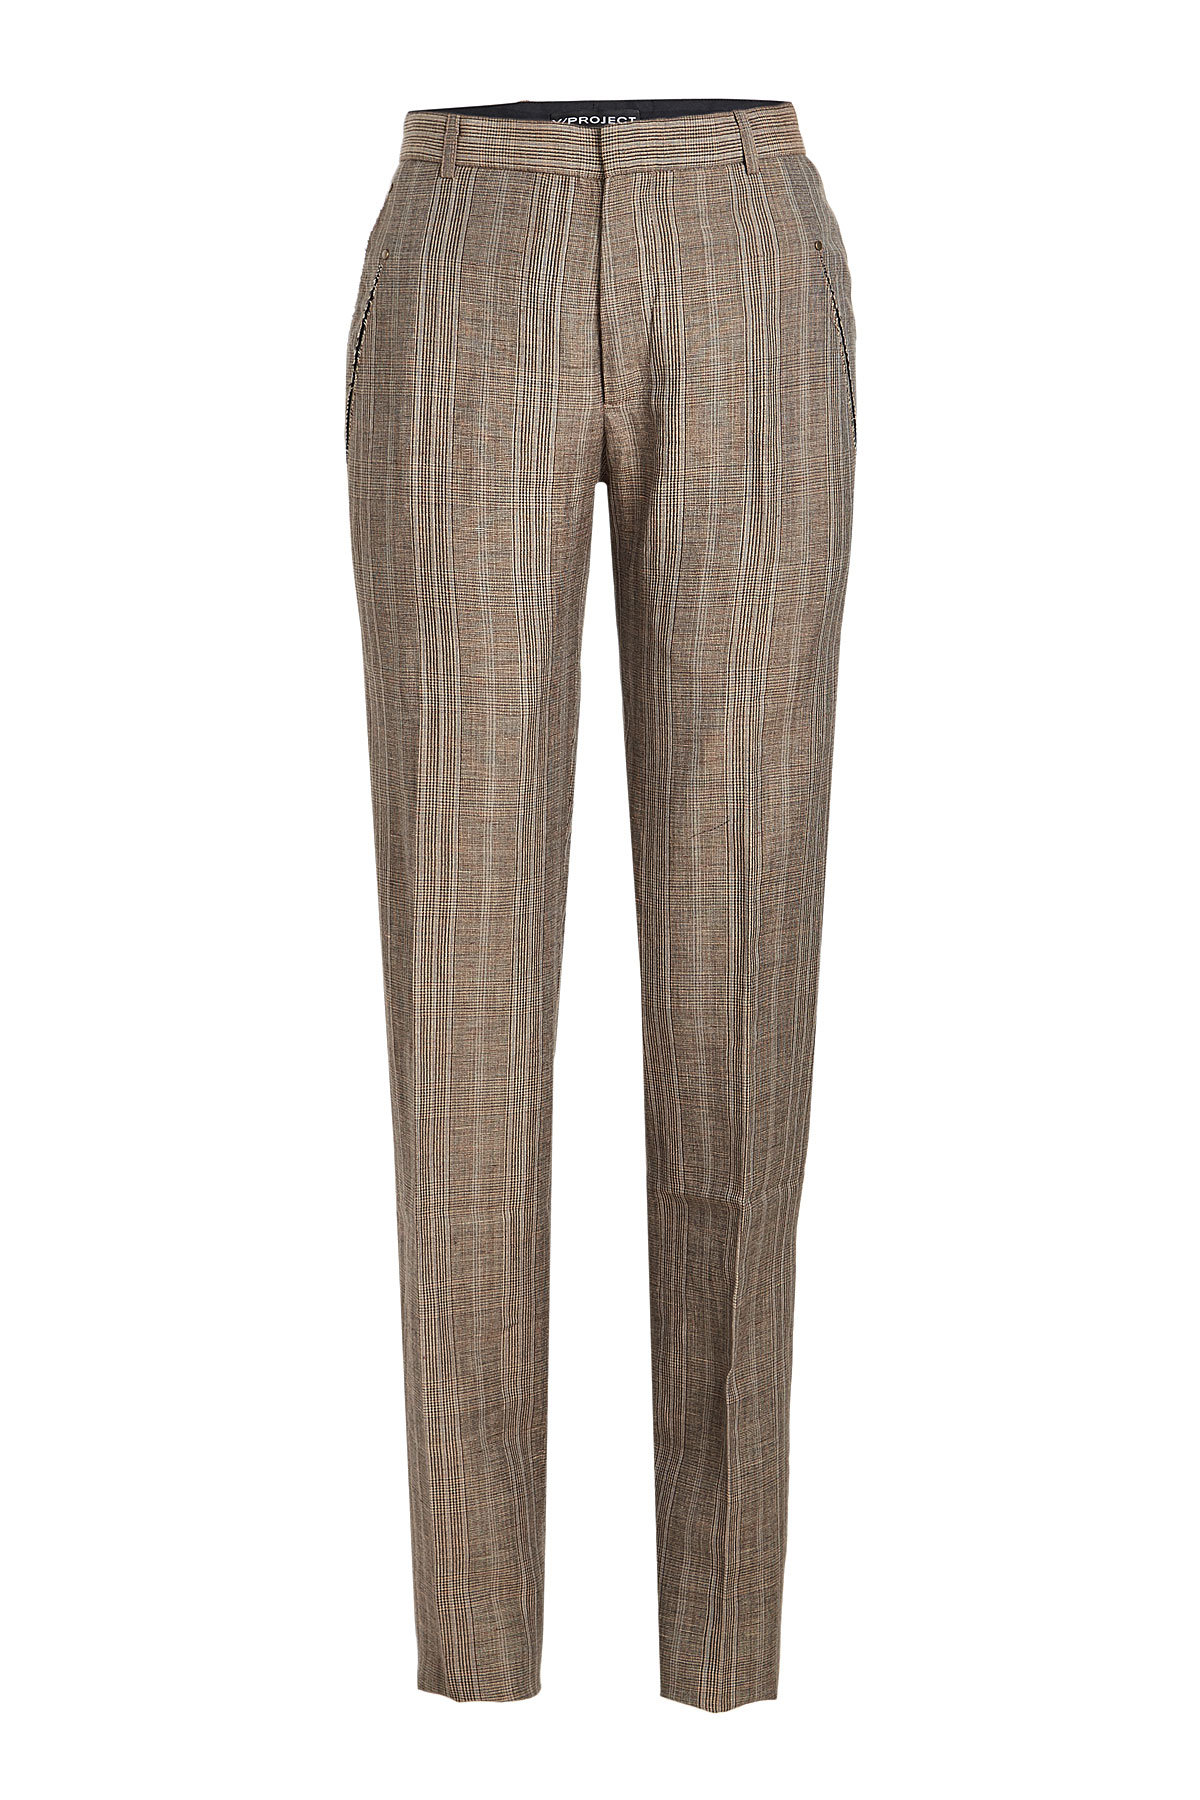 Y/Project - Striped Pants in Wool and Linen